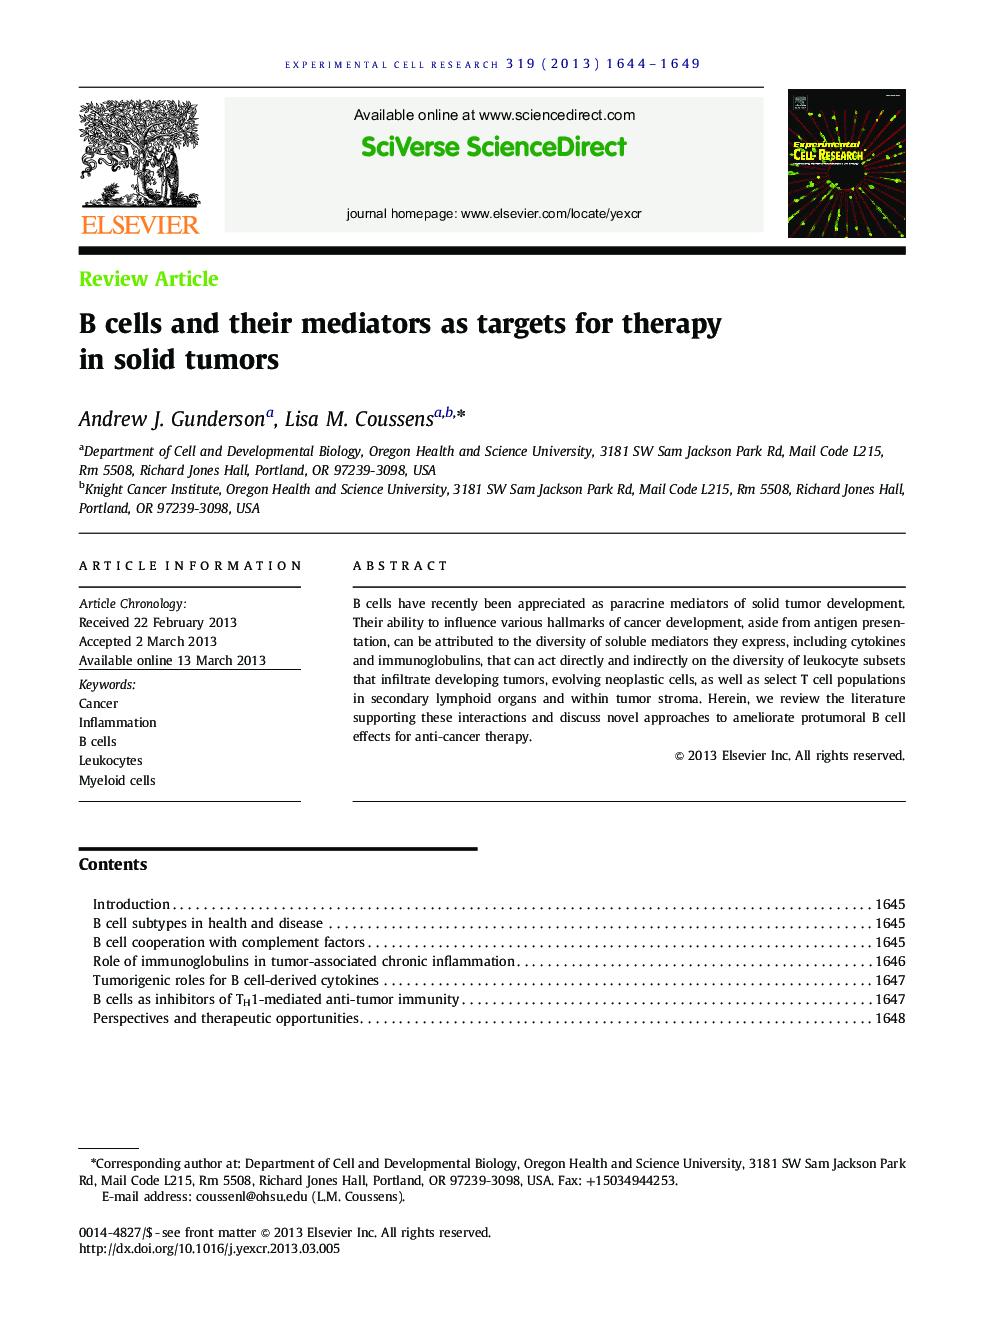 B cells and their mediators as targets for therapy in solid tumors